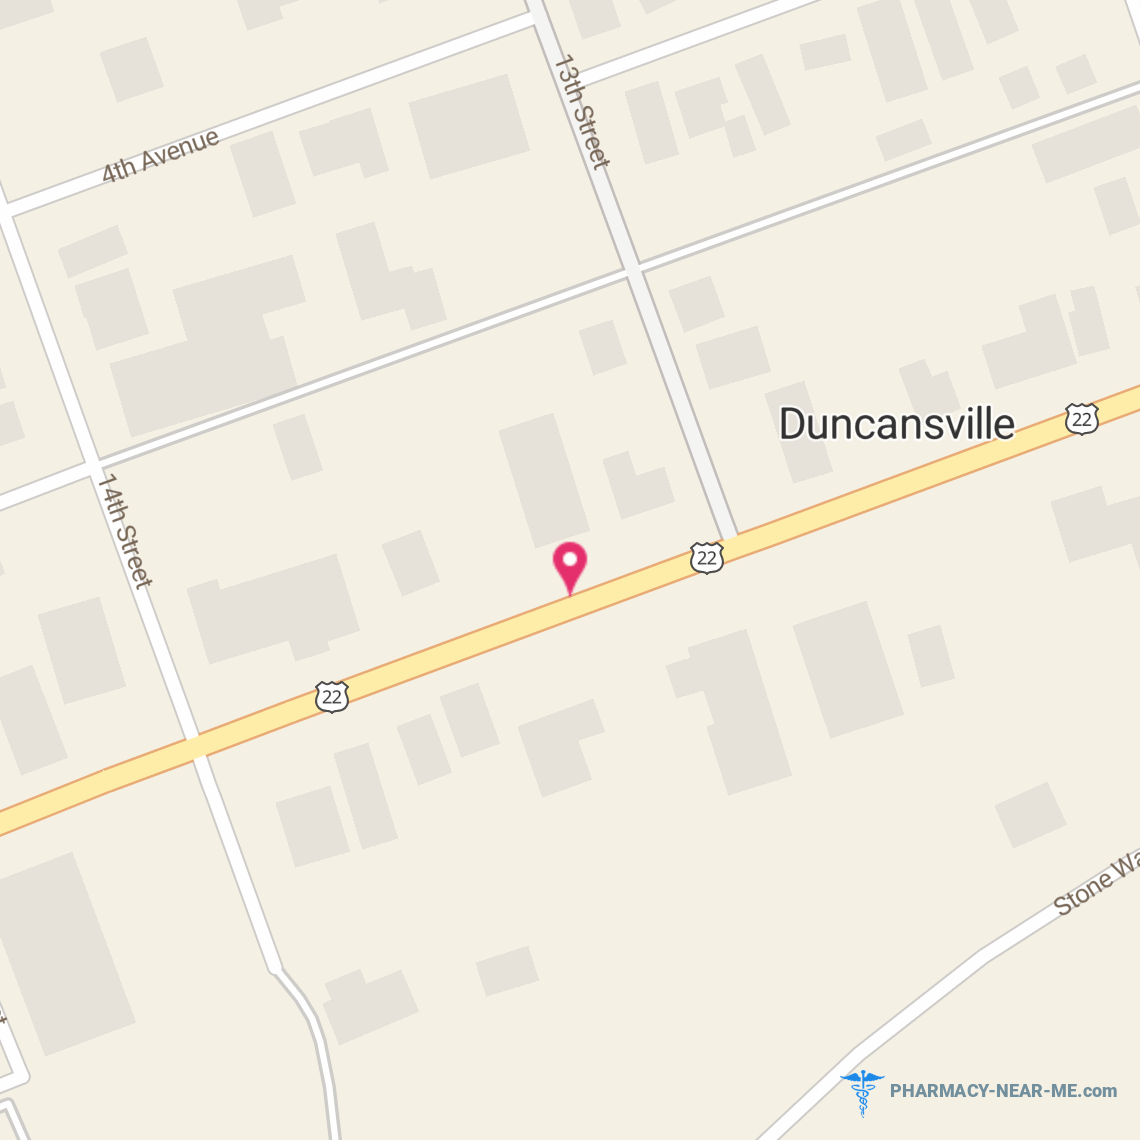 DUNCANSVILLE PHARMACY - Pharmacy Hours, Phone, Reviews & Information: 1328 3rd Avenue, Duncansville, Pennsylvania 16635, United States